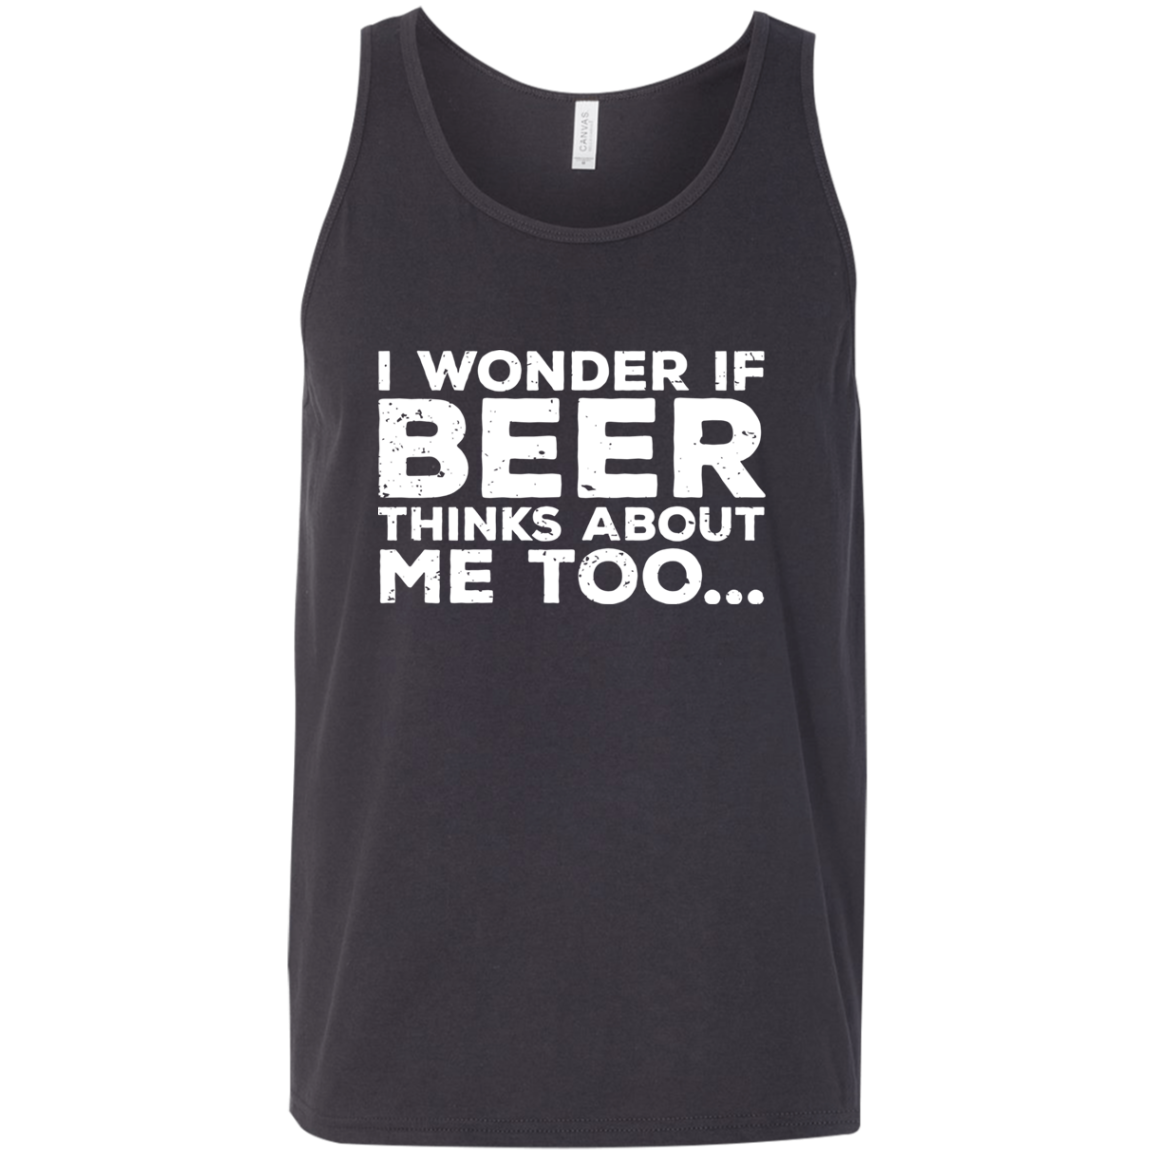 I Wonder If Beer Thinks About Me Too Tank Top T-Shirts - The Beer Lodge